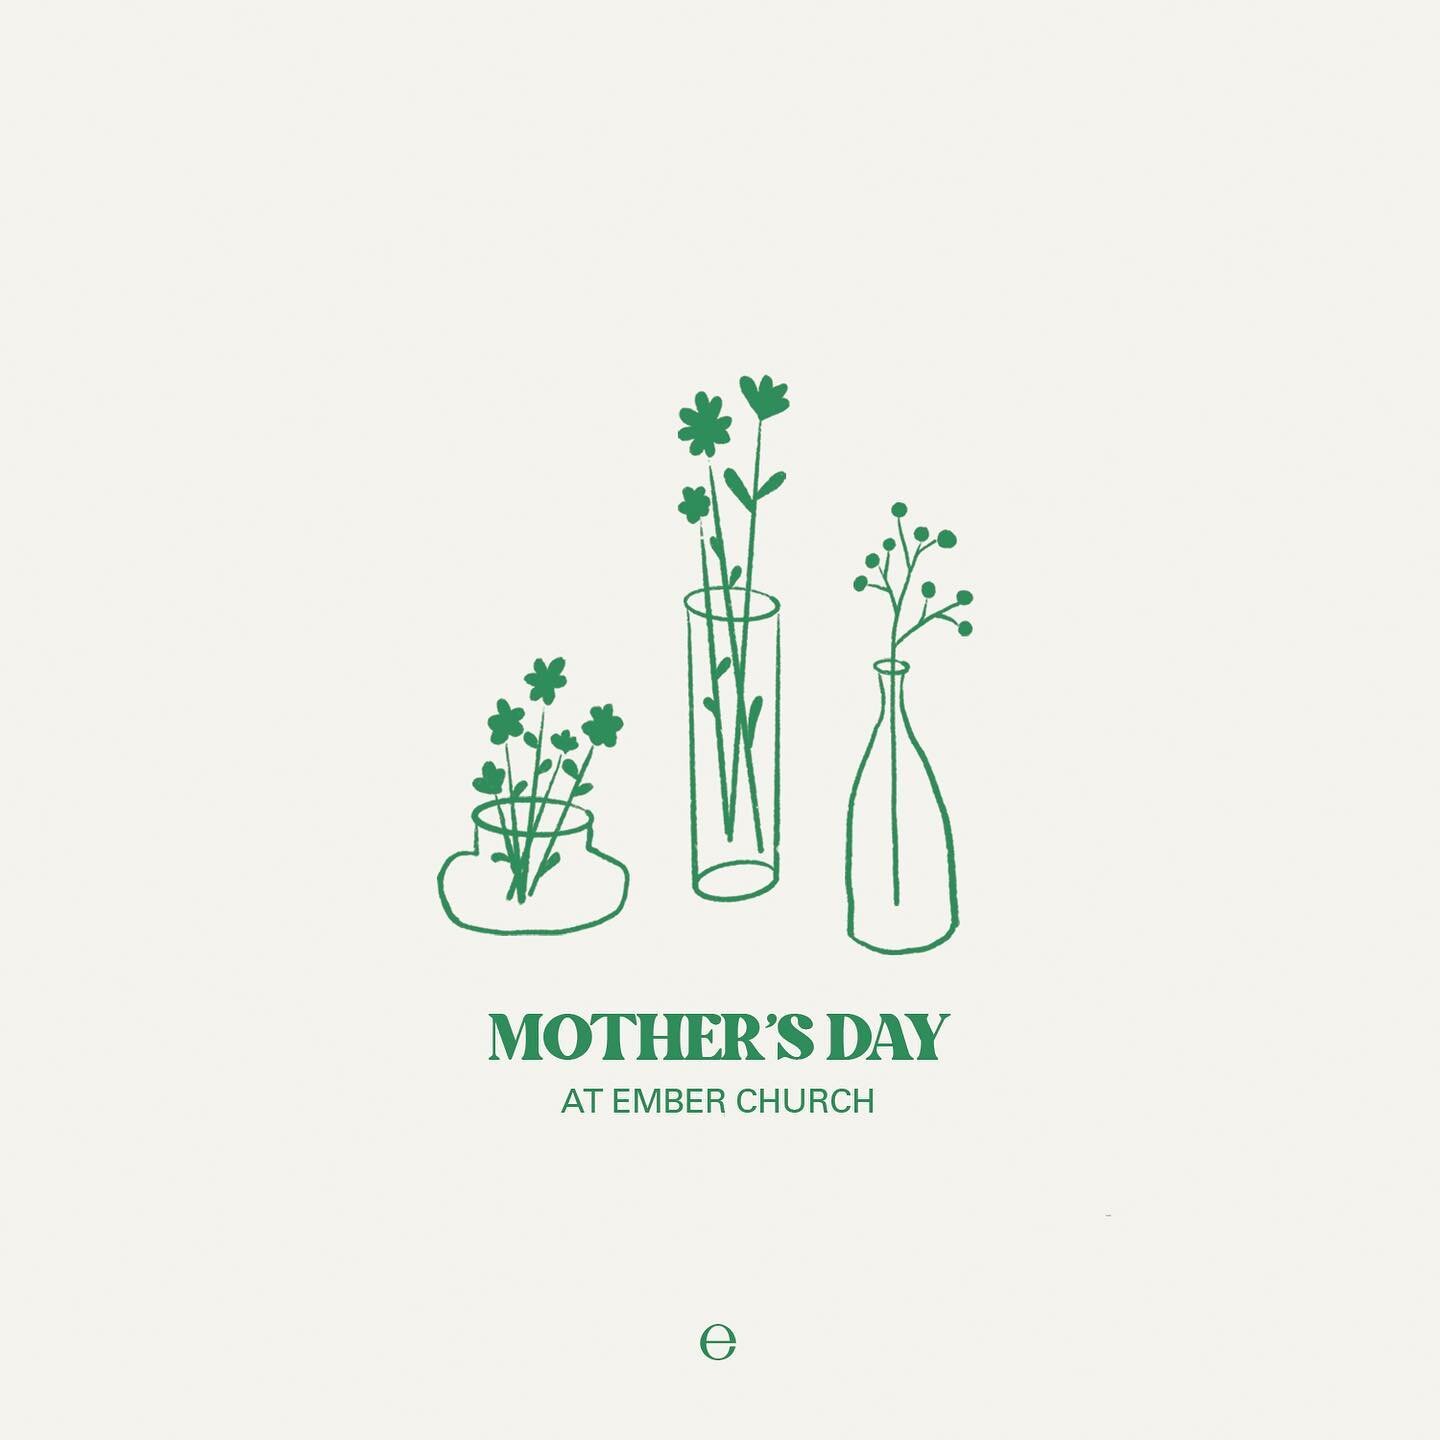 Mother&rsquo;s Day is this Sunday and we can&rsquo;t wait to celebrate mothers (of all kinds)!

Join us for a special morning with a message from Pastor Kristin, giveaways, and so much more. Bring your Moms, invite your friends, and we&rsquo;ll see y